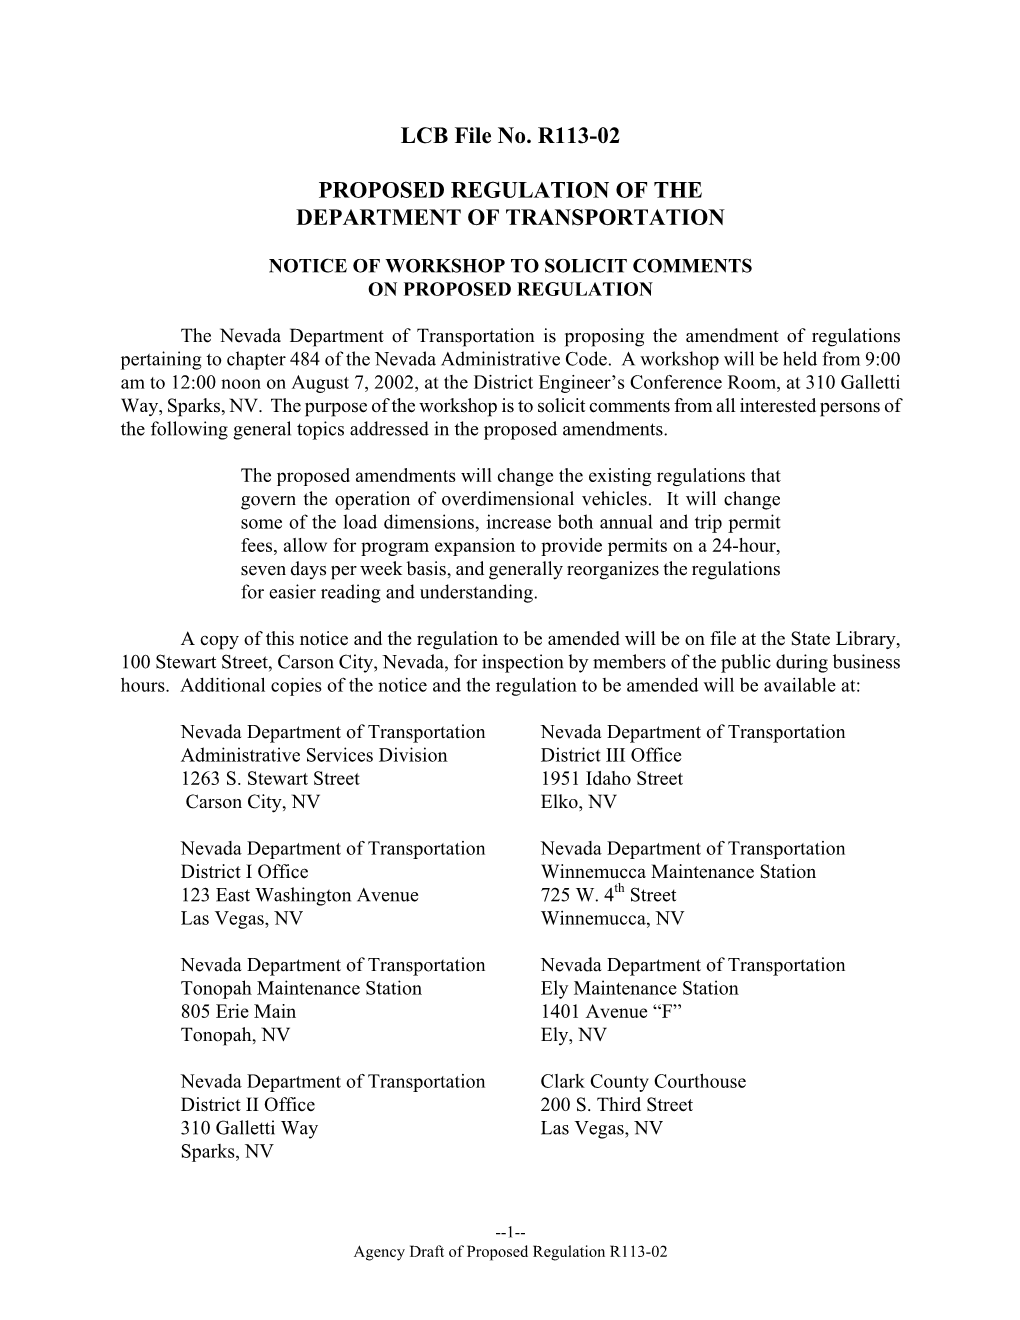 LCB File No. R113-02 PROPOSED REGULATION of THE